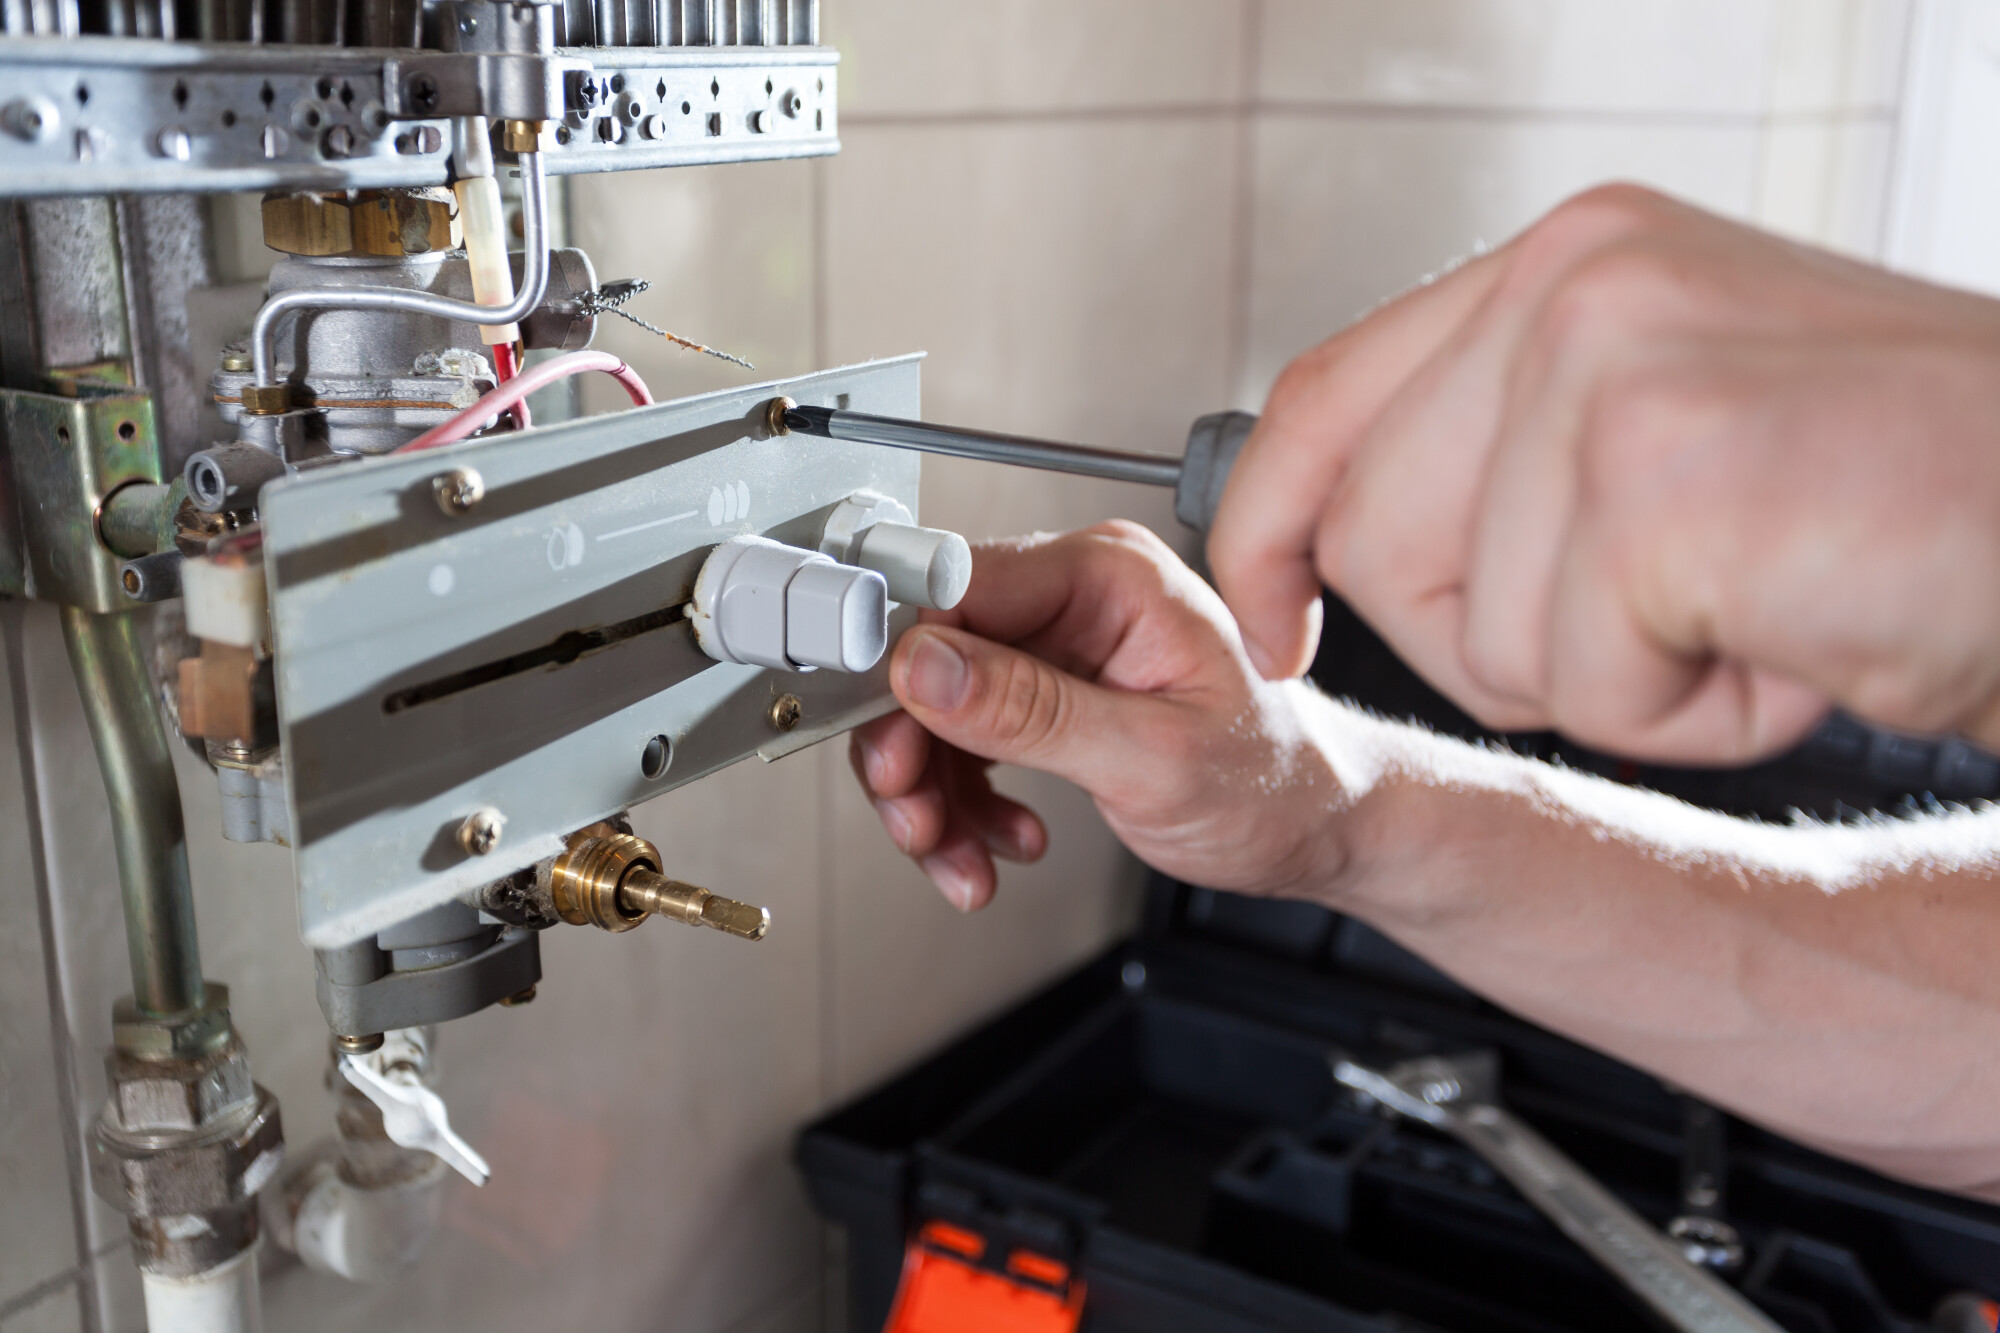 Furnace Repair Services: When Is the Right Time to Call the Pros in Palmetto, GA?